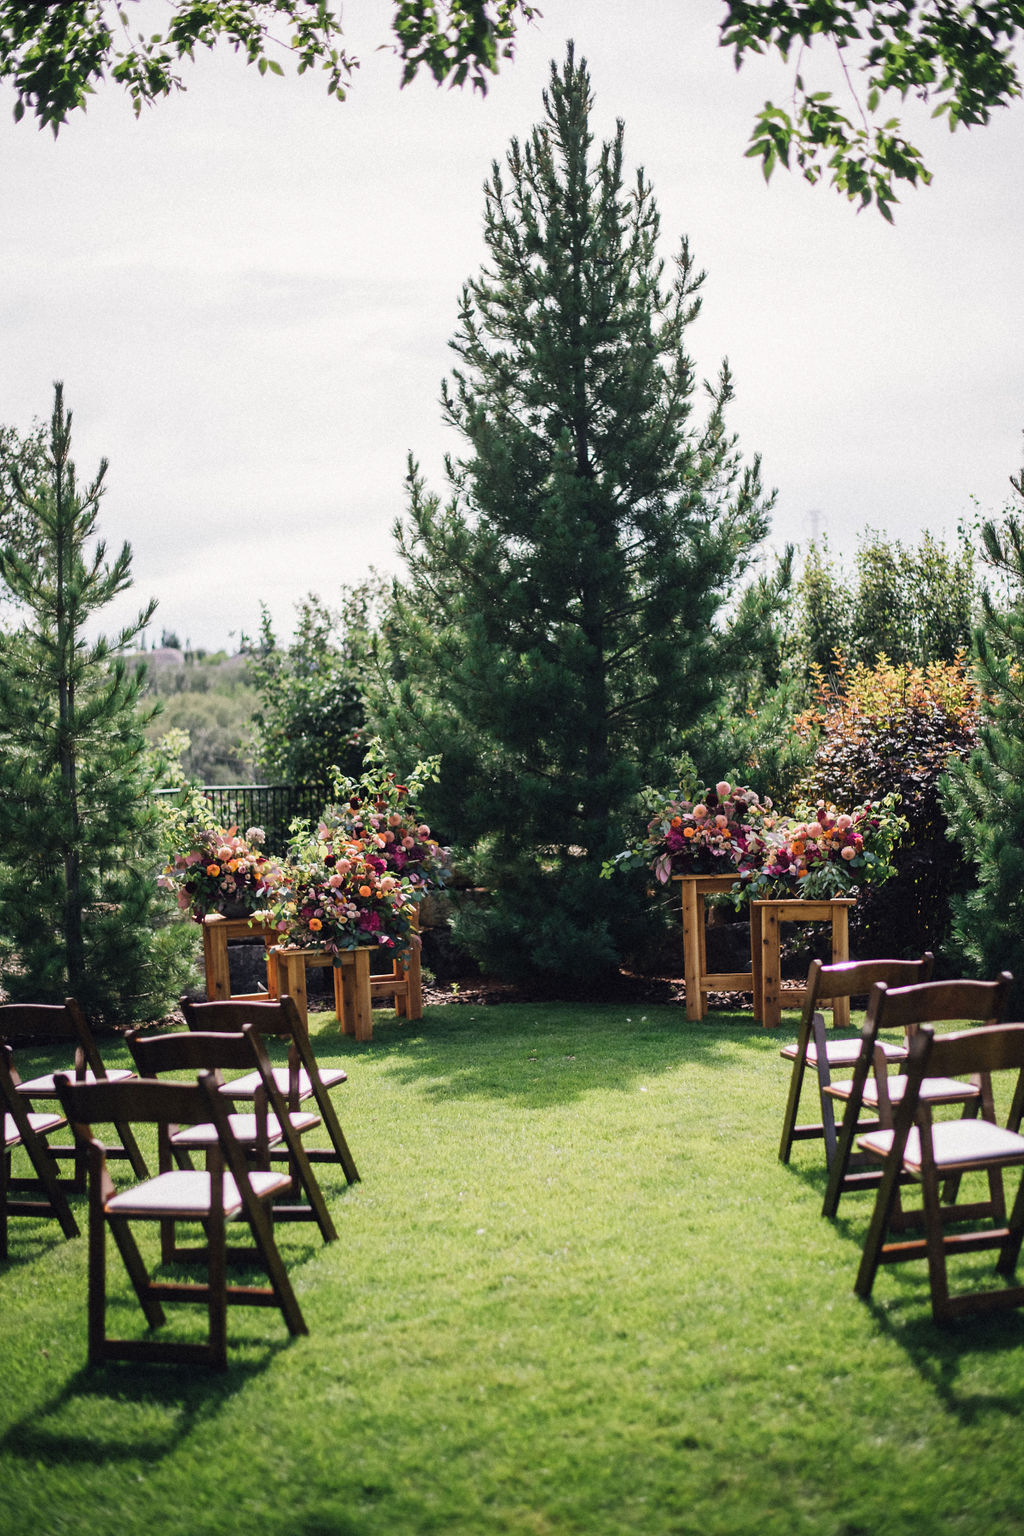 Summertime Backyard Wedding Featuring Fabulously Bright & Colourful Florals - Real Wedding featured on Bronte Bride